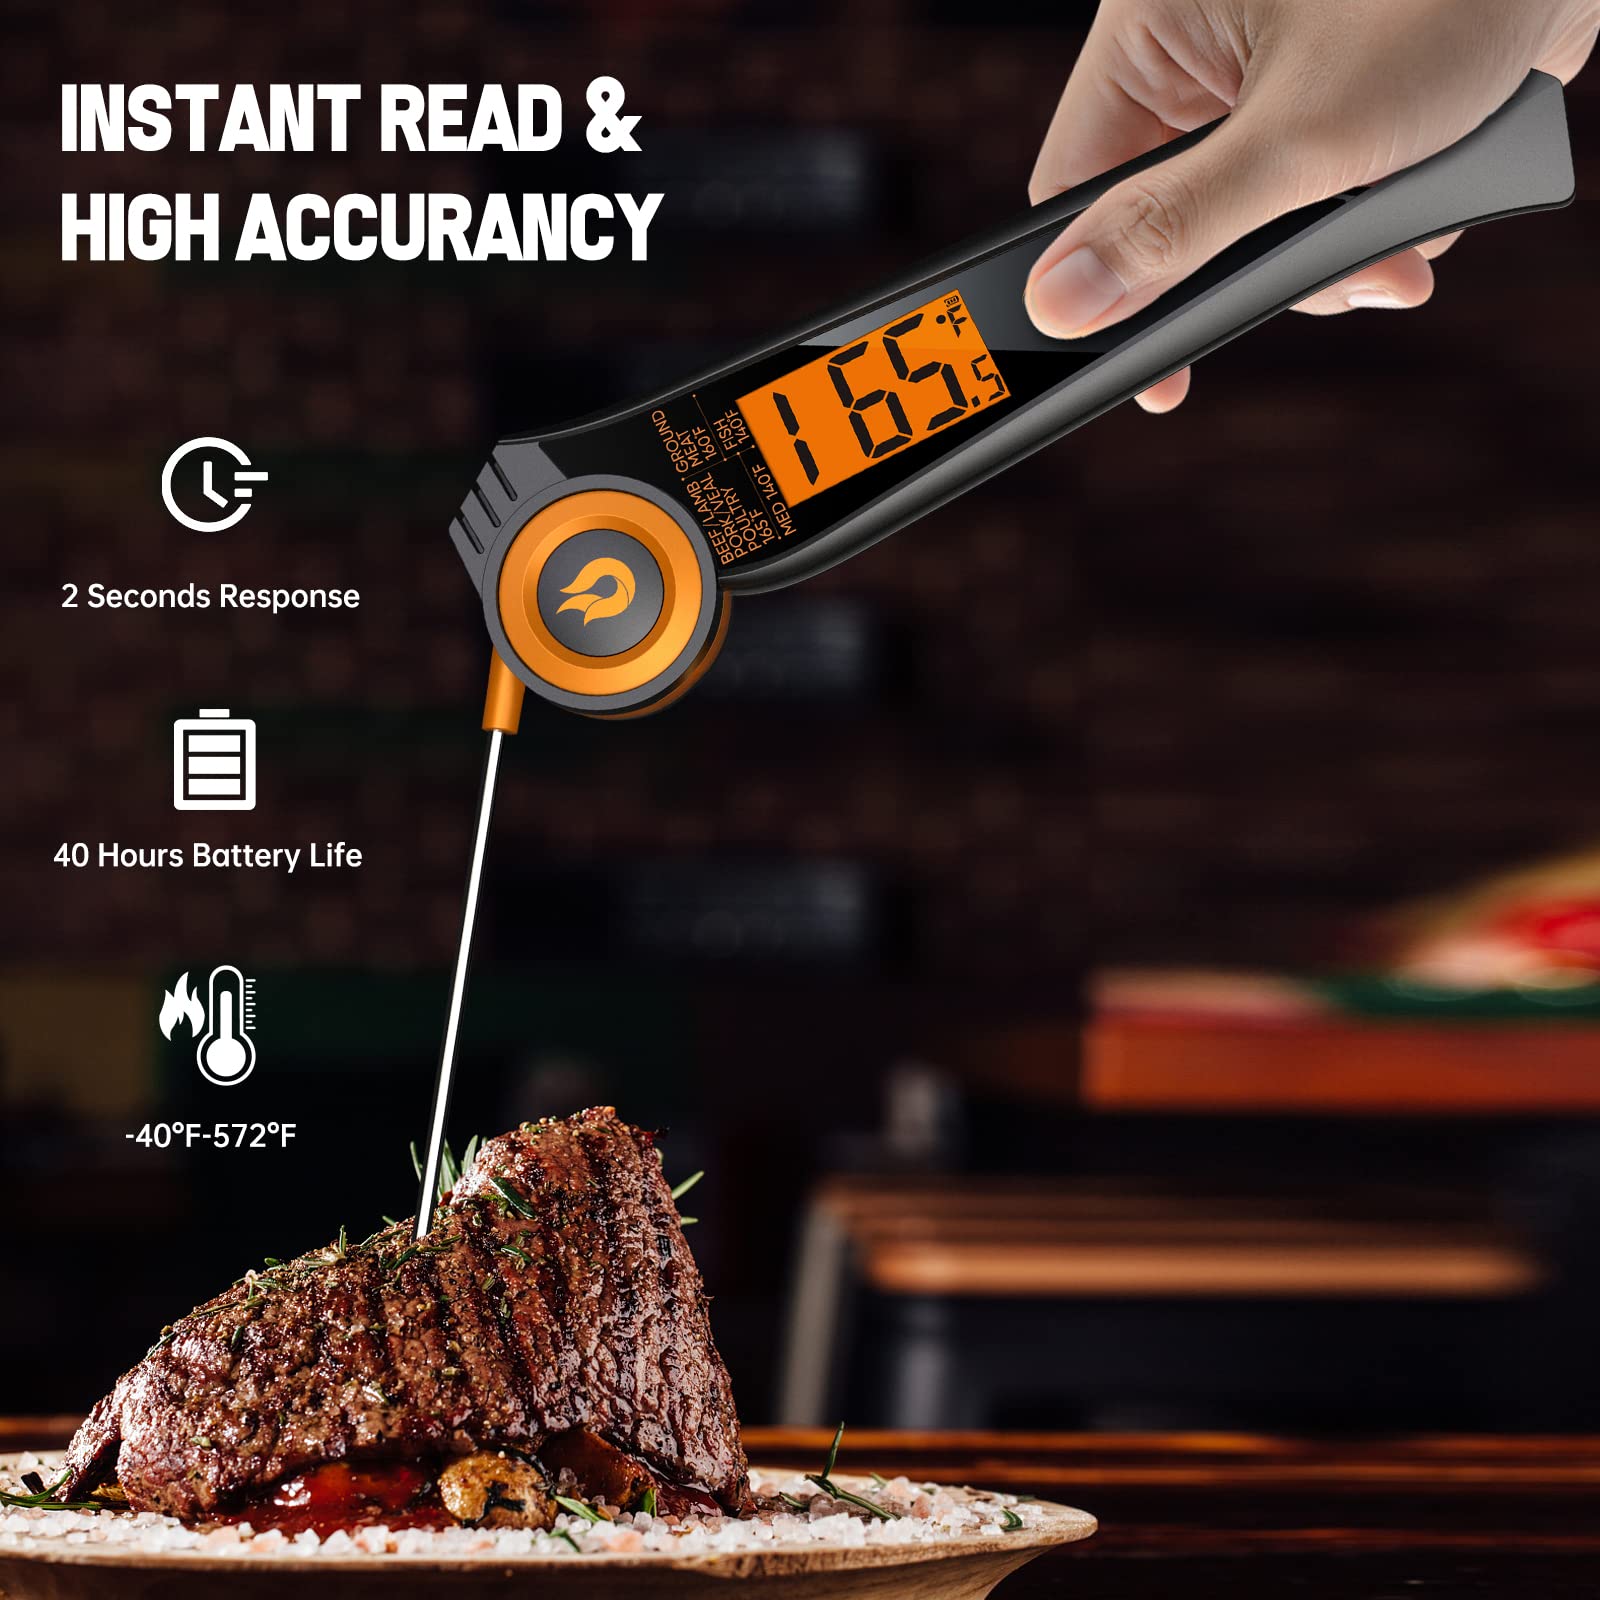 𝗨𝗽𝗴𝗿𝗮𝗱𝗲𝗱 Meat Thermometer Digital for Grill and Cooking - Instant Read Meat Thermometer 6.1” Ultra Long Waterproof Grill Thermometer w/Reversible Display for BBQ, Oil Deep Frying